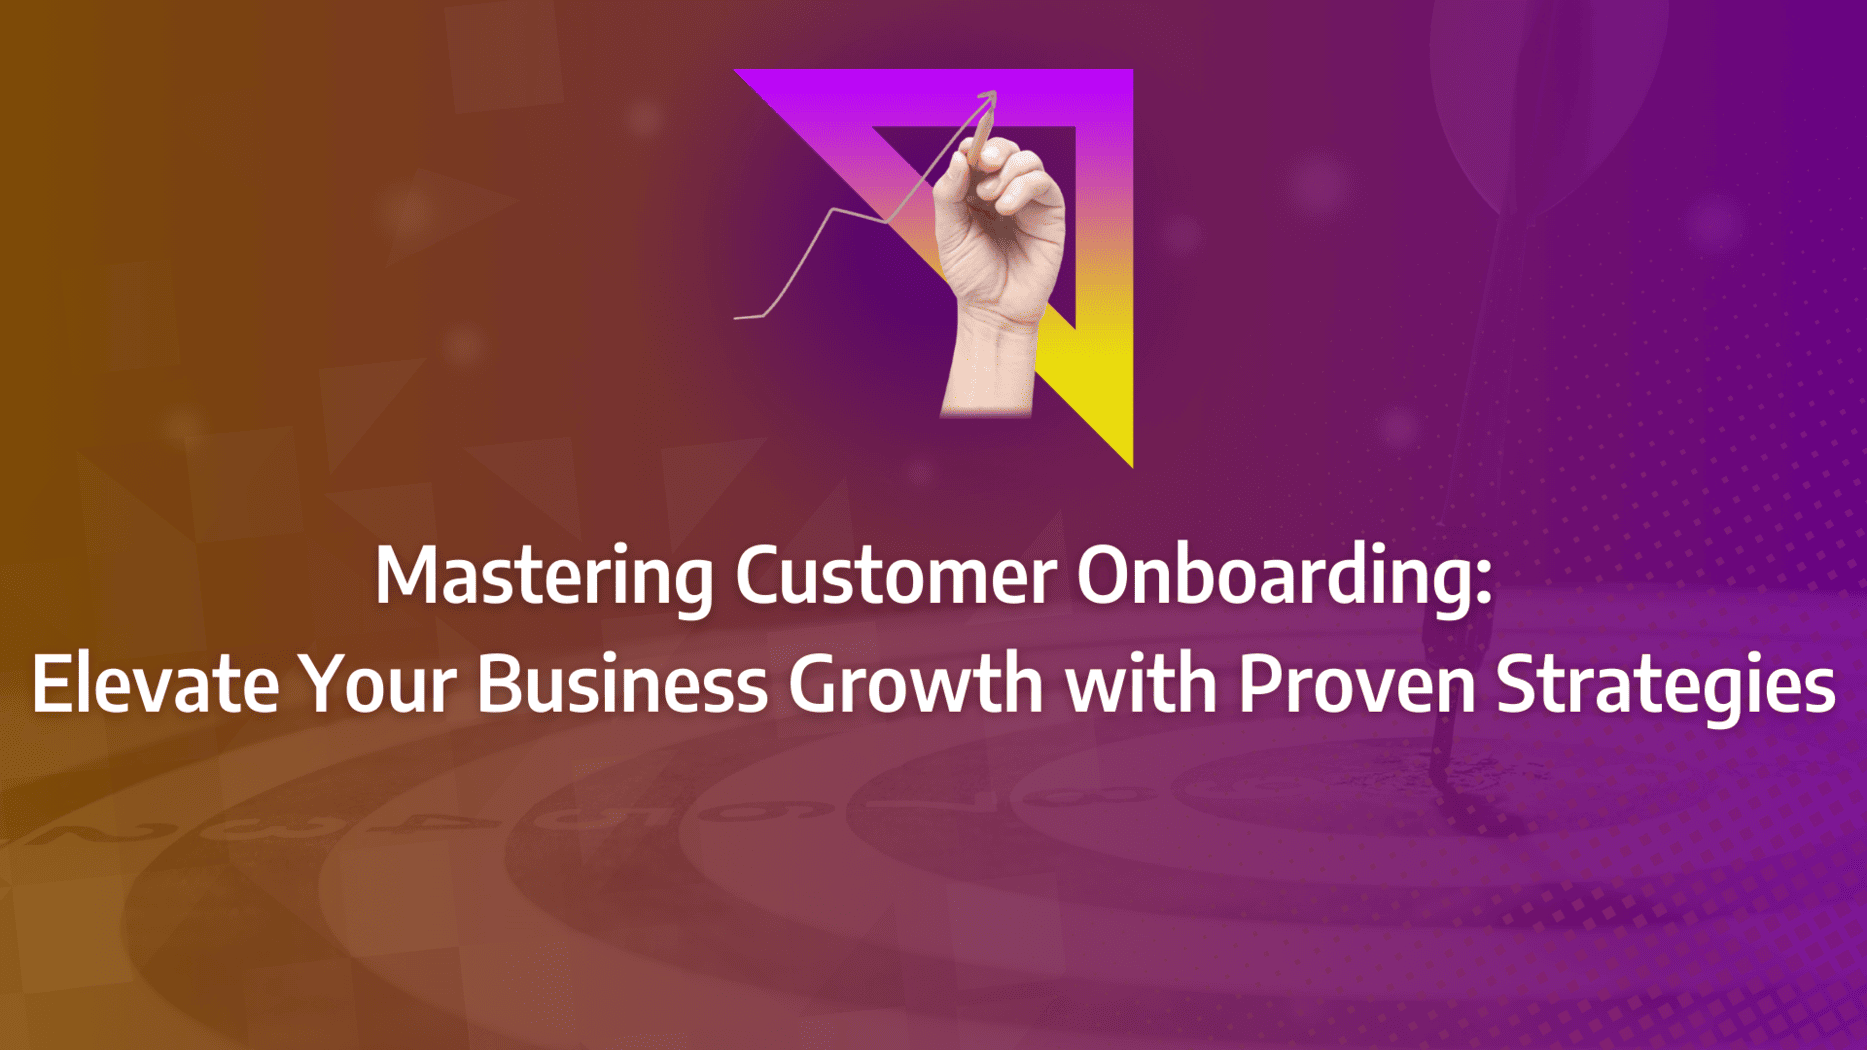 "Customer Onboarding: Accelerating business growth through refined customer onboarding processes, innovative onboarding software, structured onboarding journeys, and comprehensive onboarding checklists. : strategy framework diagram for customer onboarding process, customer onboarding software, onboarding journeys, customer onboarding checklist"